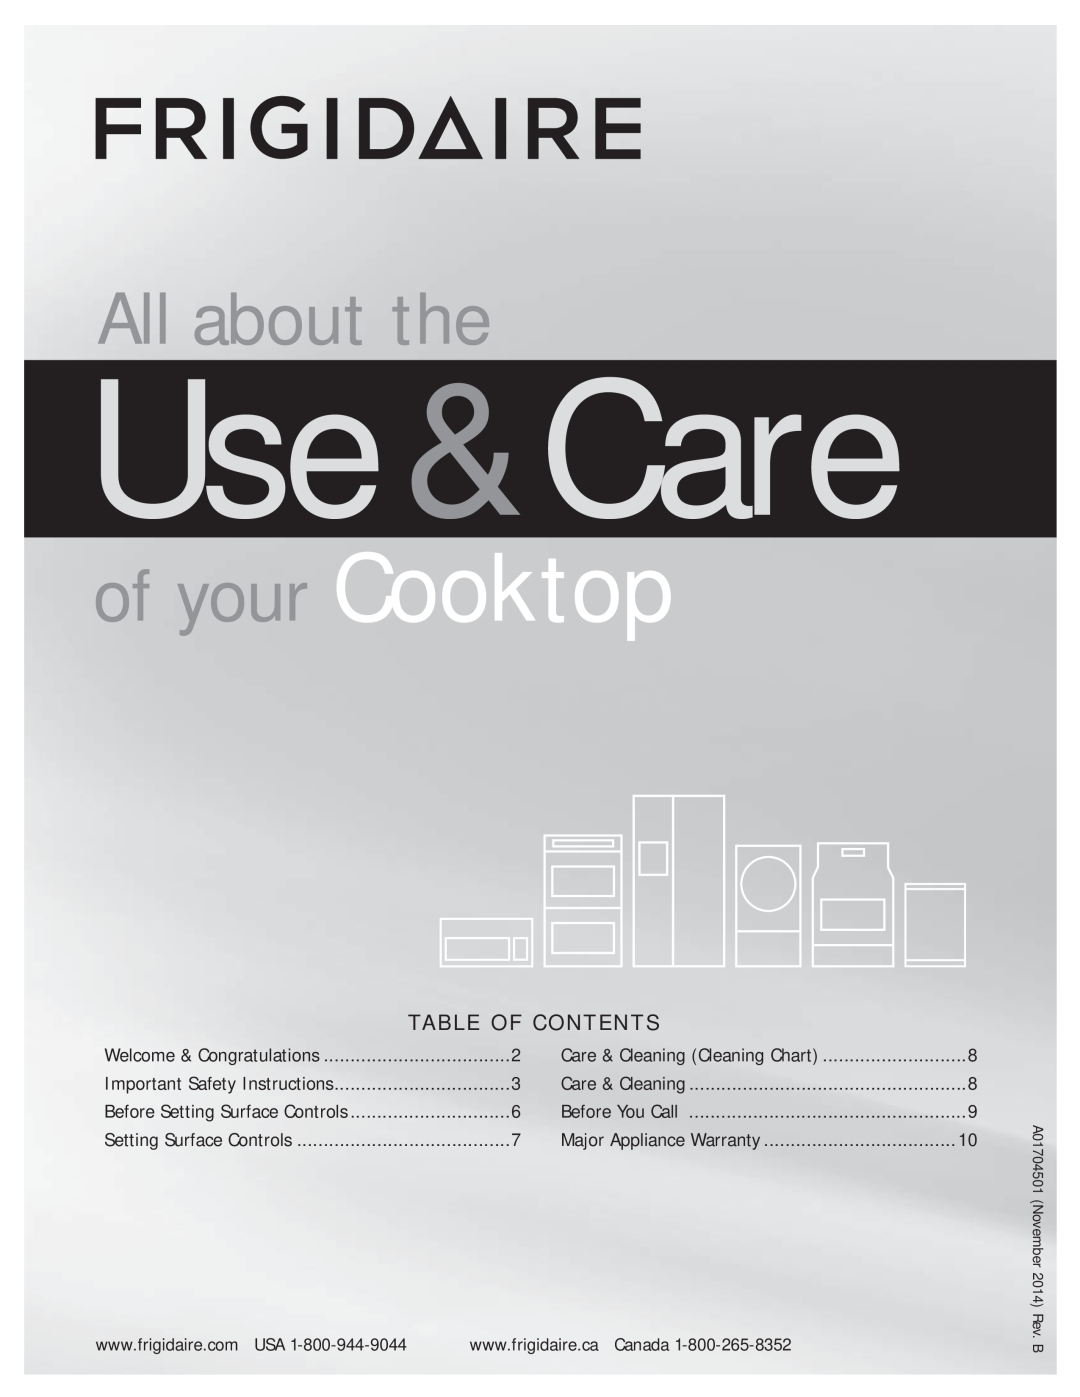 Frigidaire A01704501 important safety instructions Use &Care, All about the, of your Cooktop, Ta B L E O F C O N T E N T S 